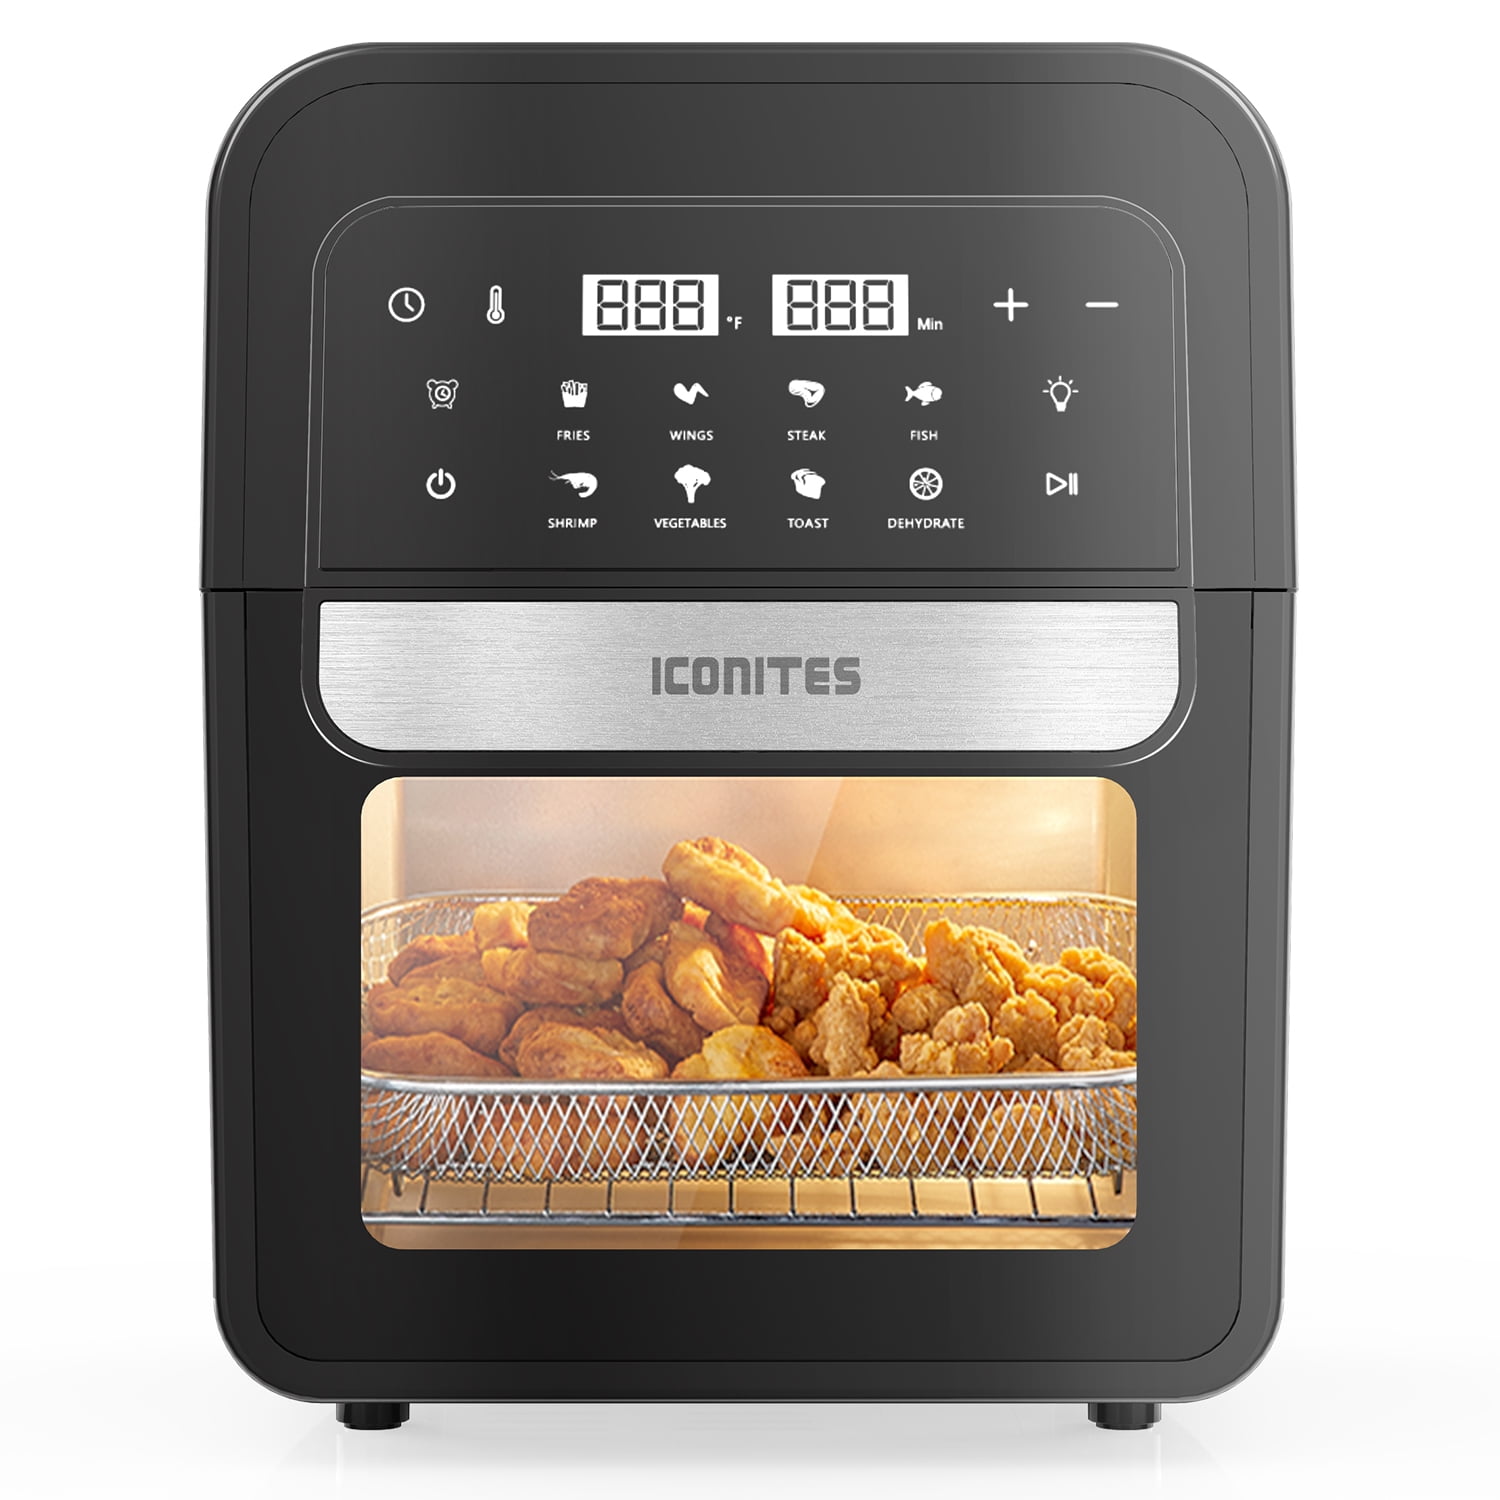 Iconiteser 10 in 1 air fryer oven review and demo by Sara 